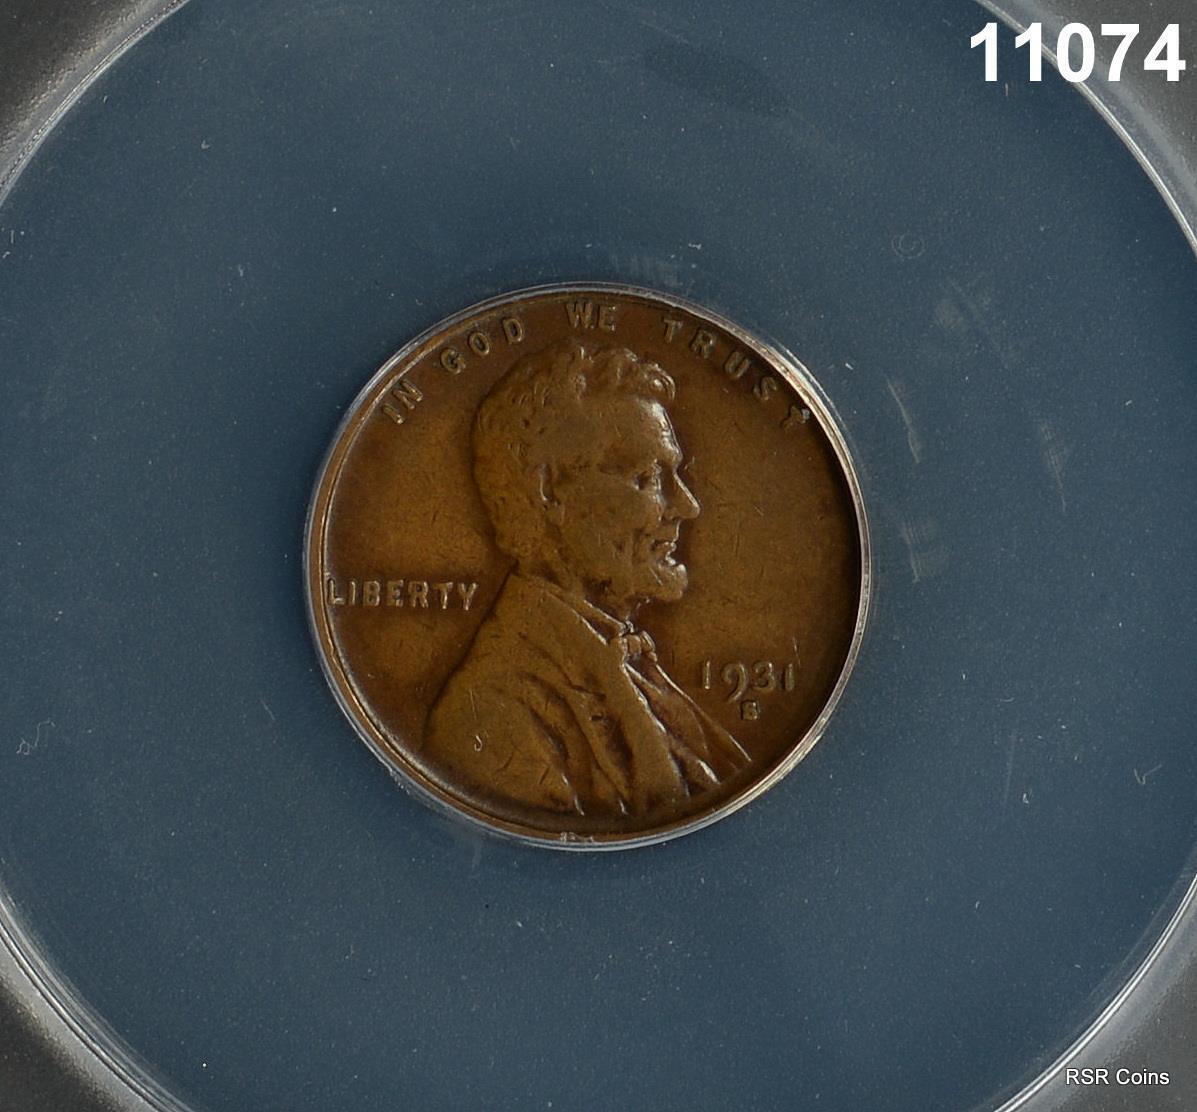 1931 S LINCOLN CENT ANACS CERTIFIED VF25 LACQUERED #11074